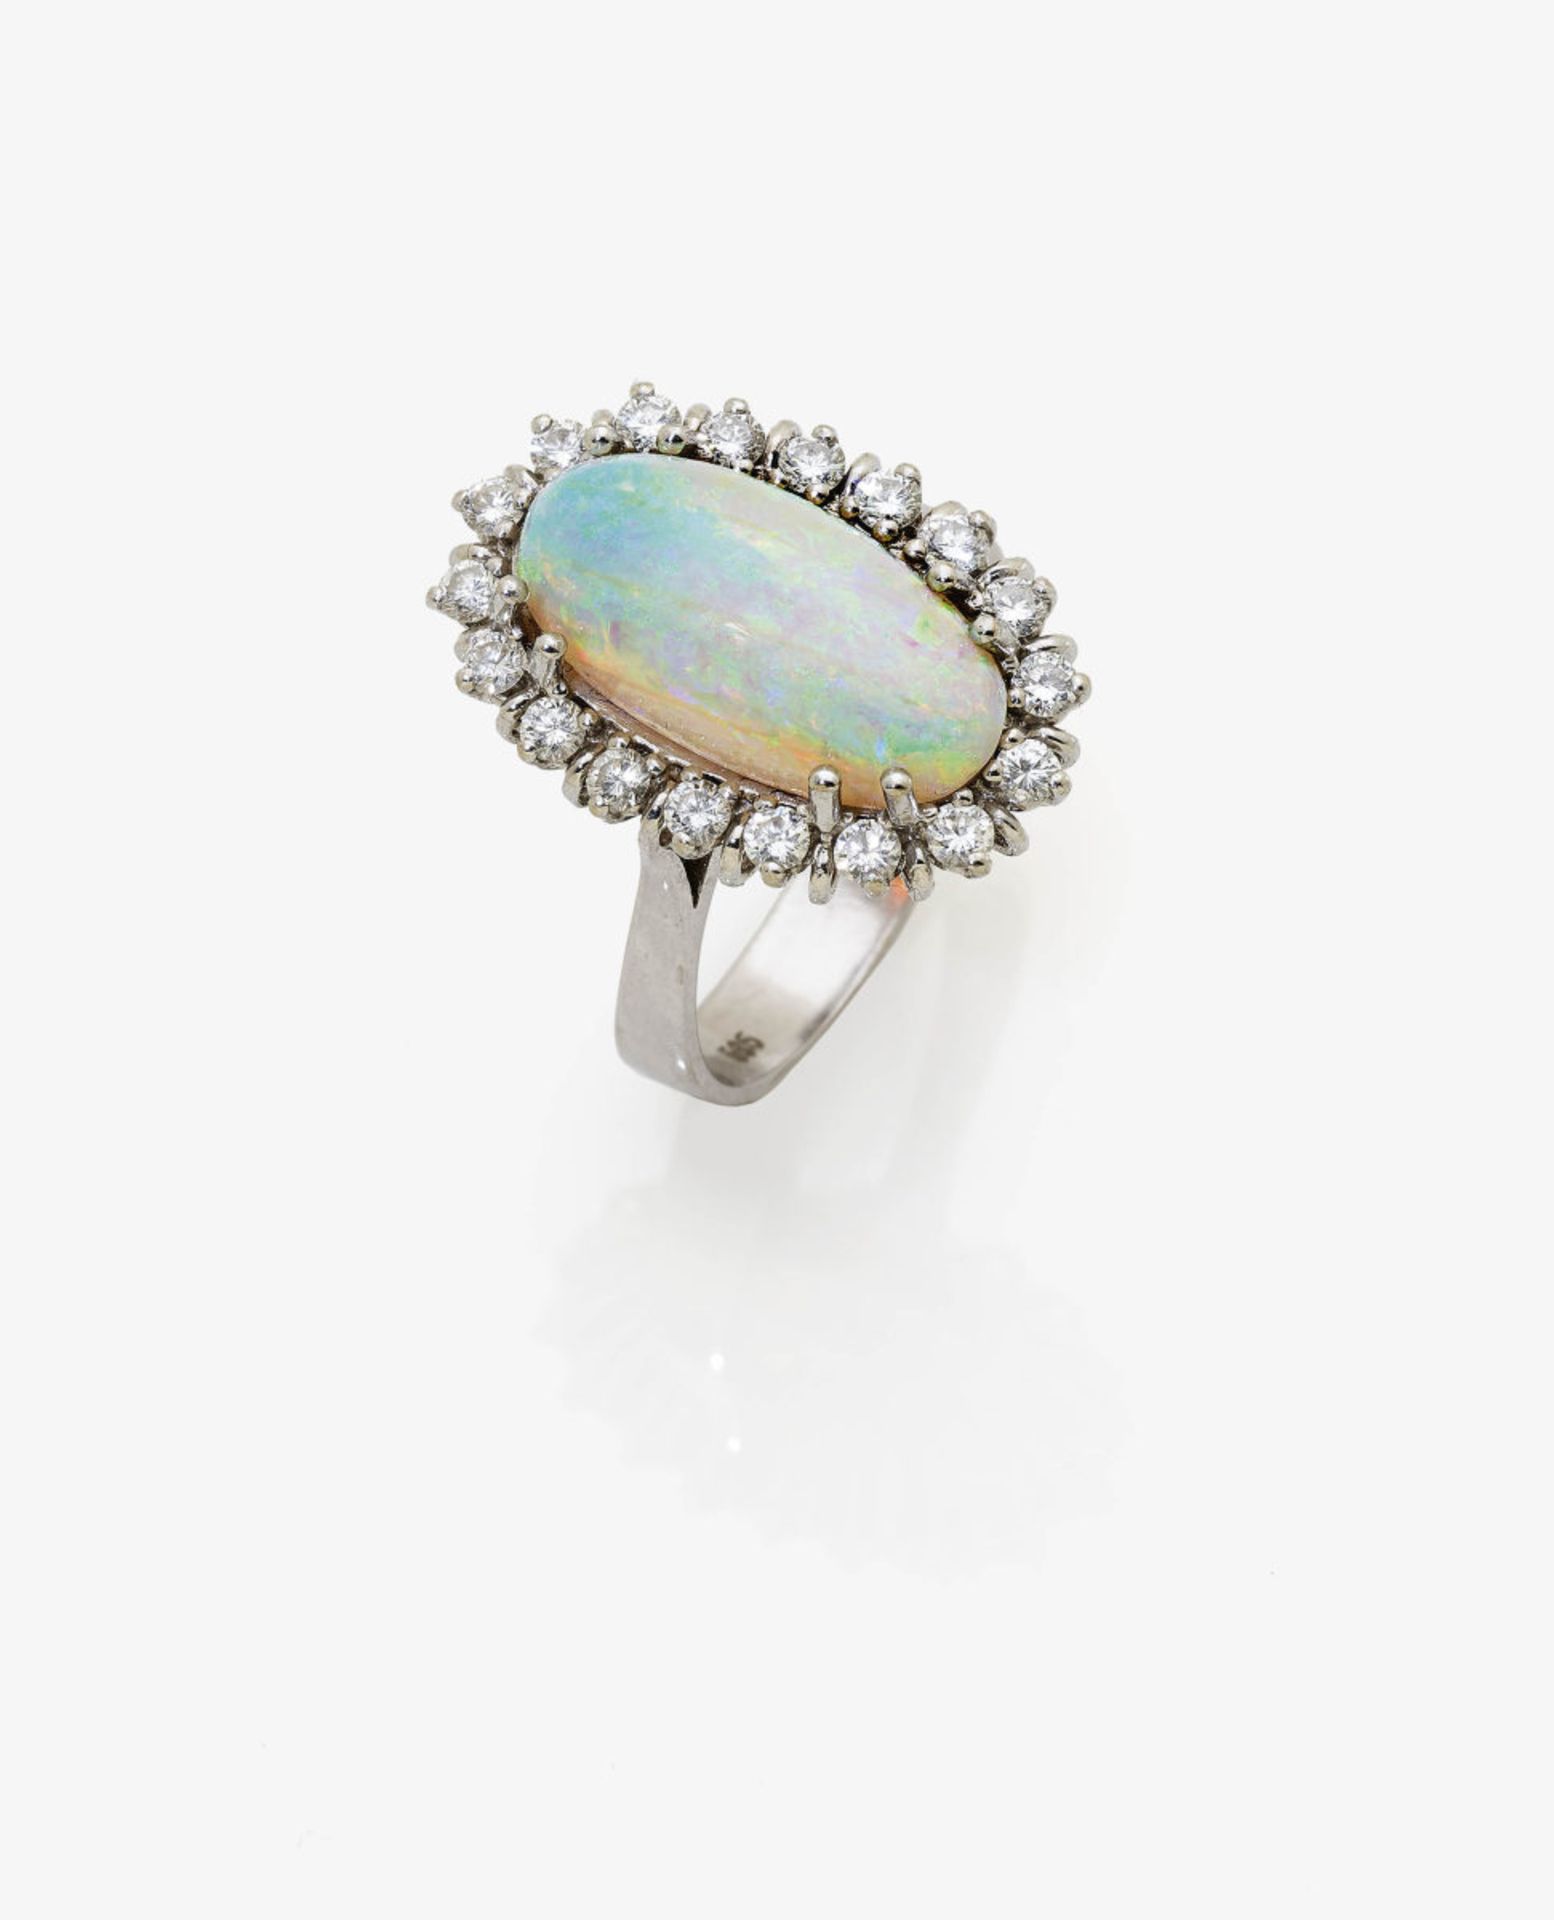 A Crystal Opal and Diamond Ring